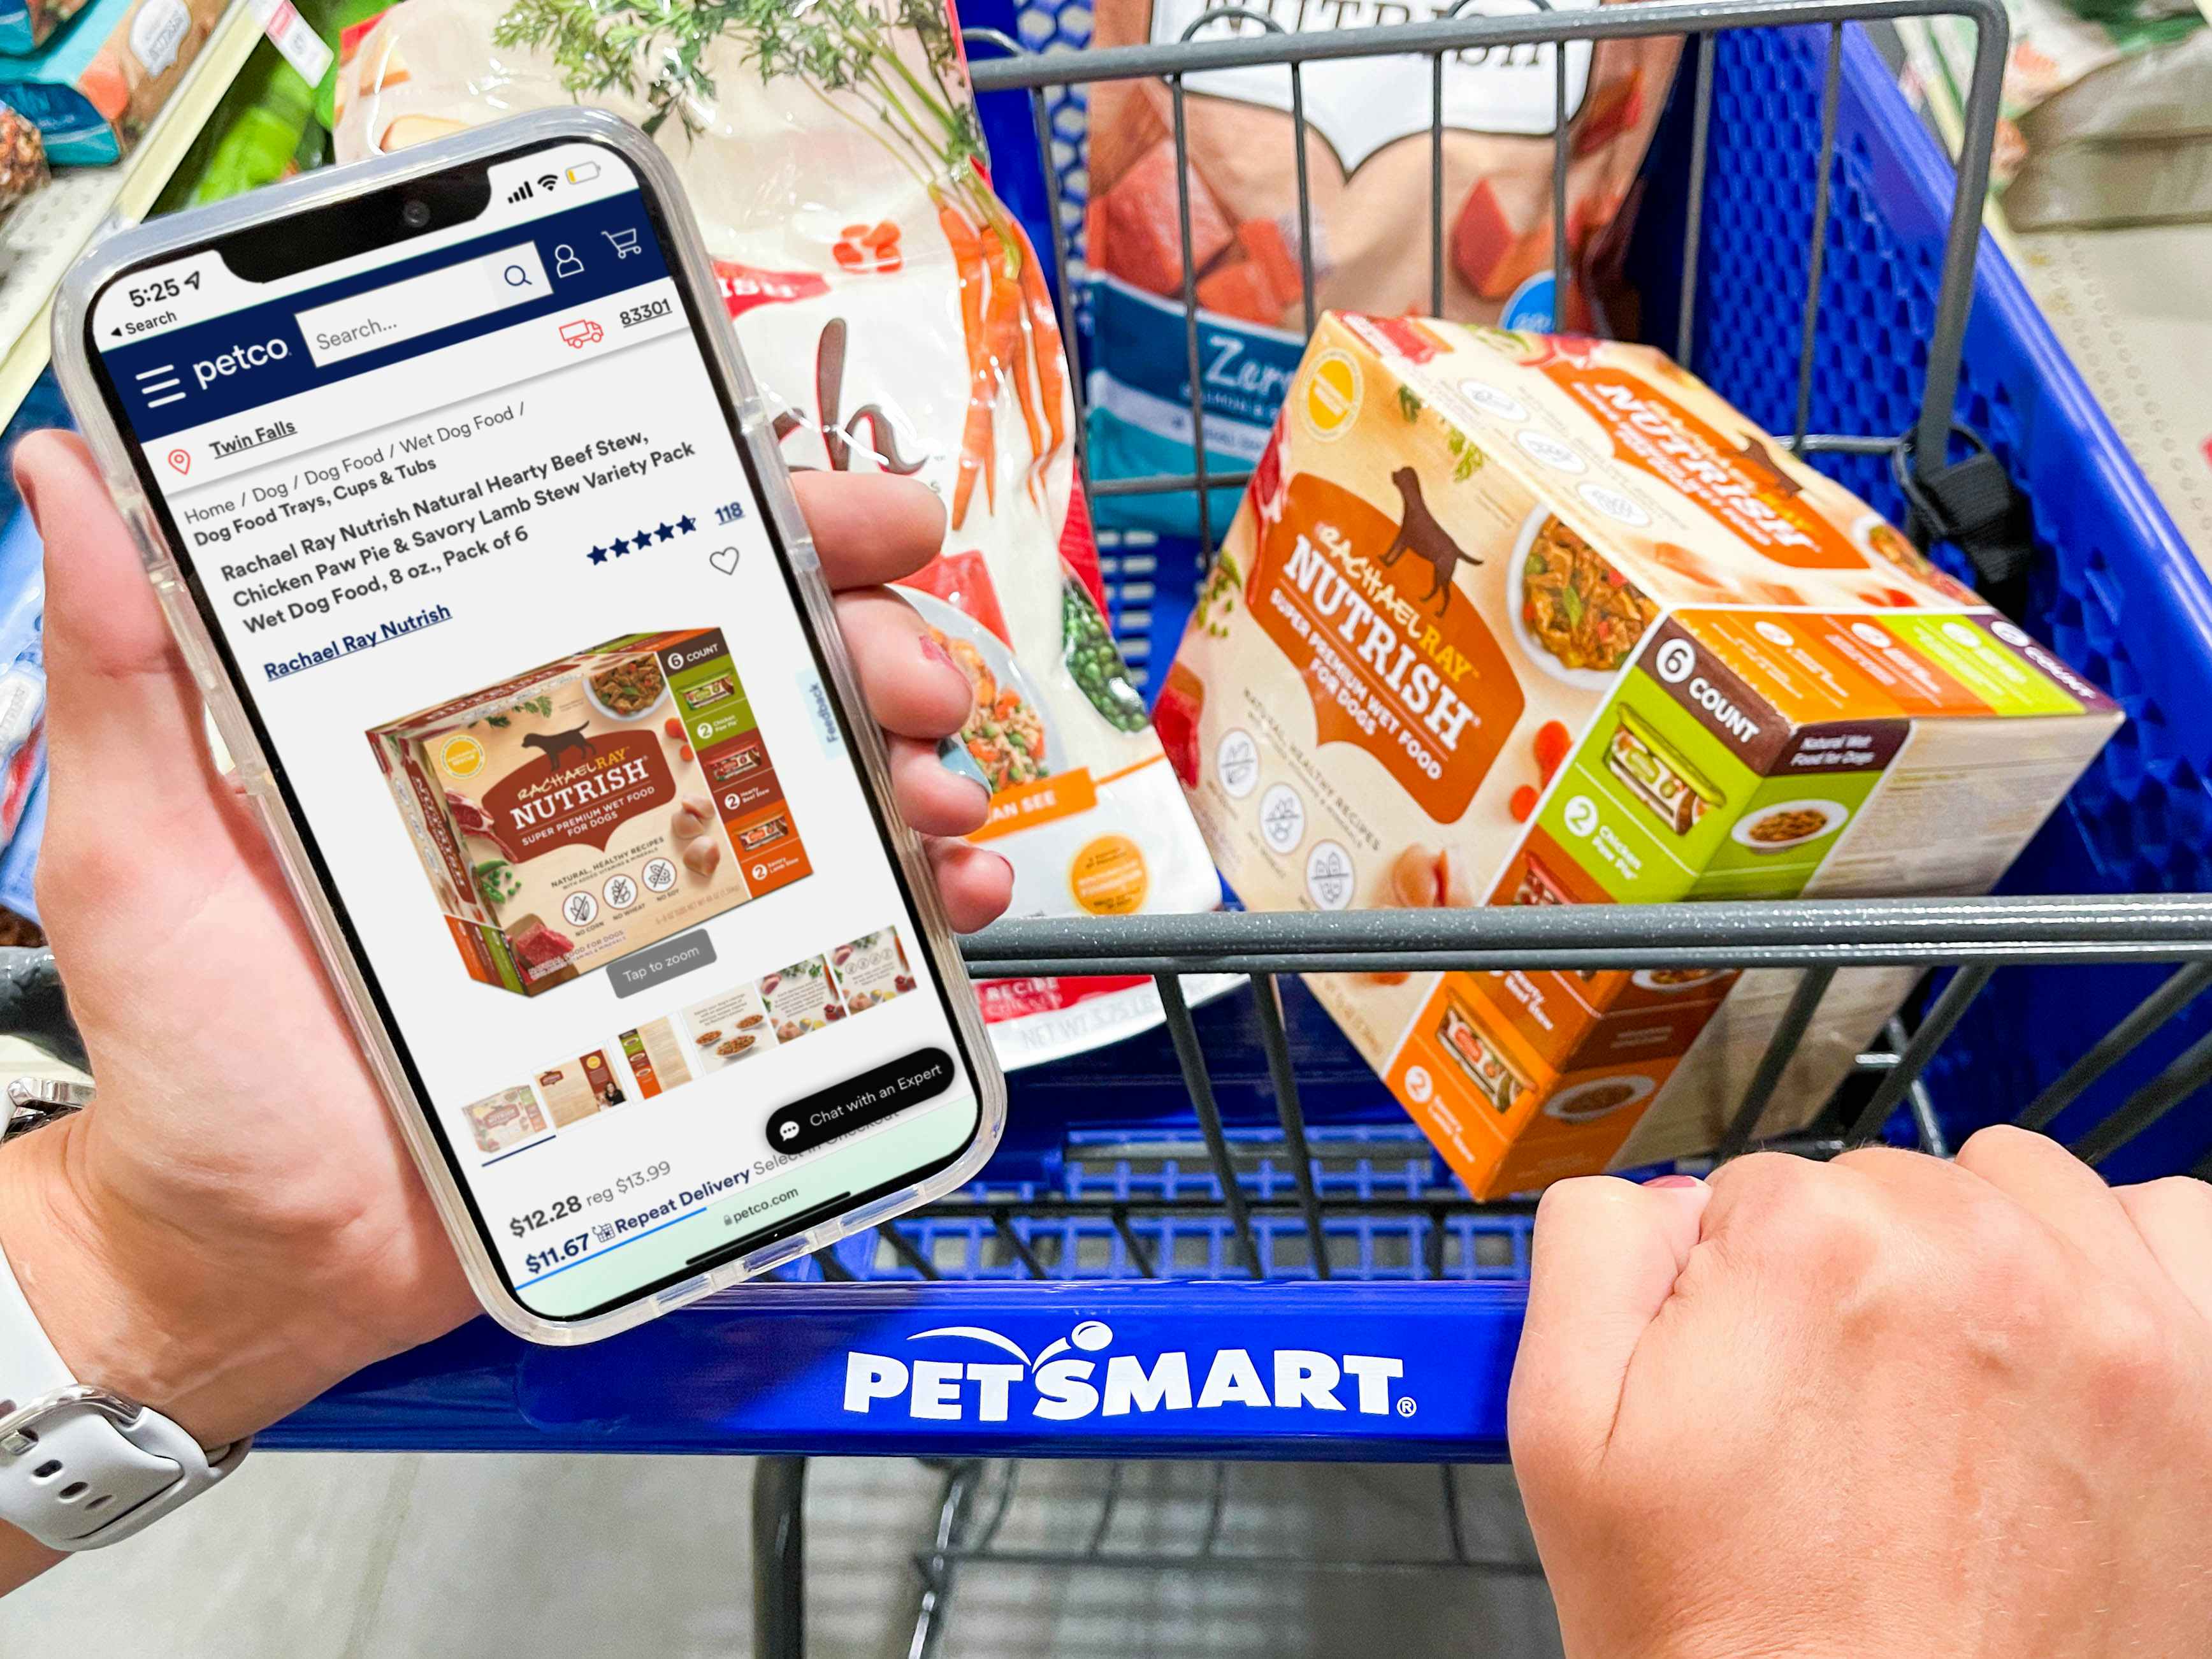 A person's hands, one holding a cellphone with the Petco website open to a product, and the other hand pushing a PetSmart shopping cart with that product in the basket.